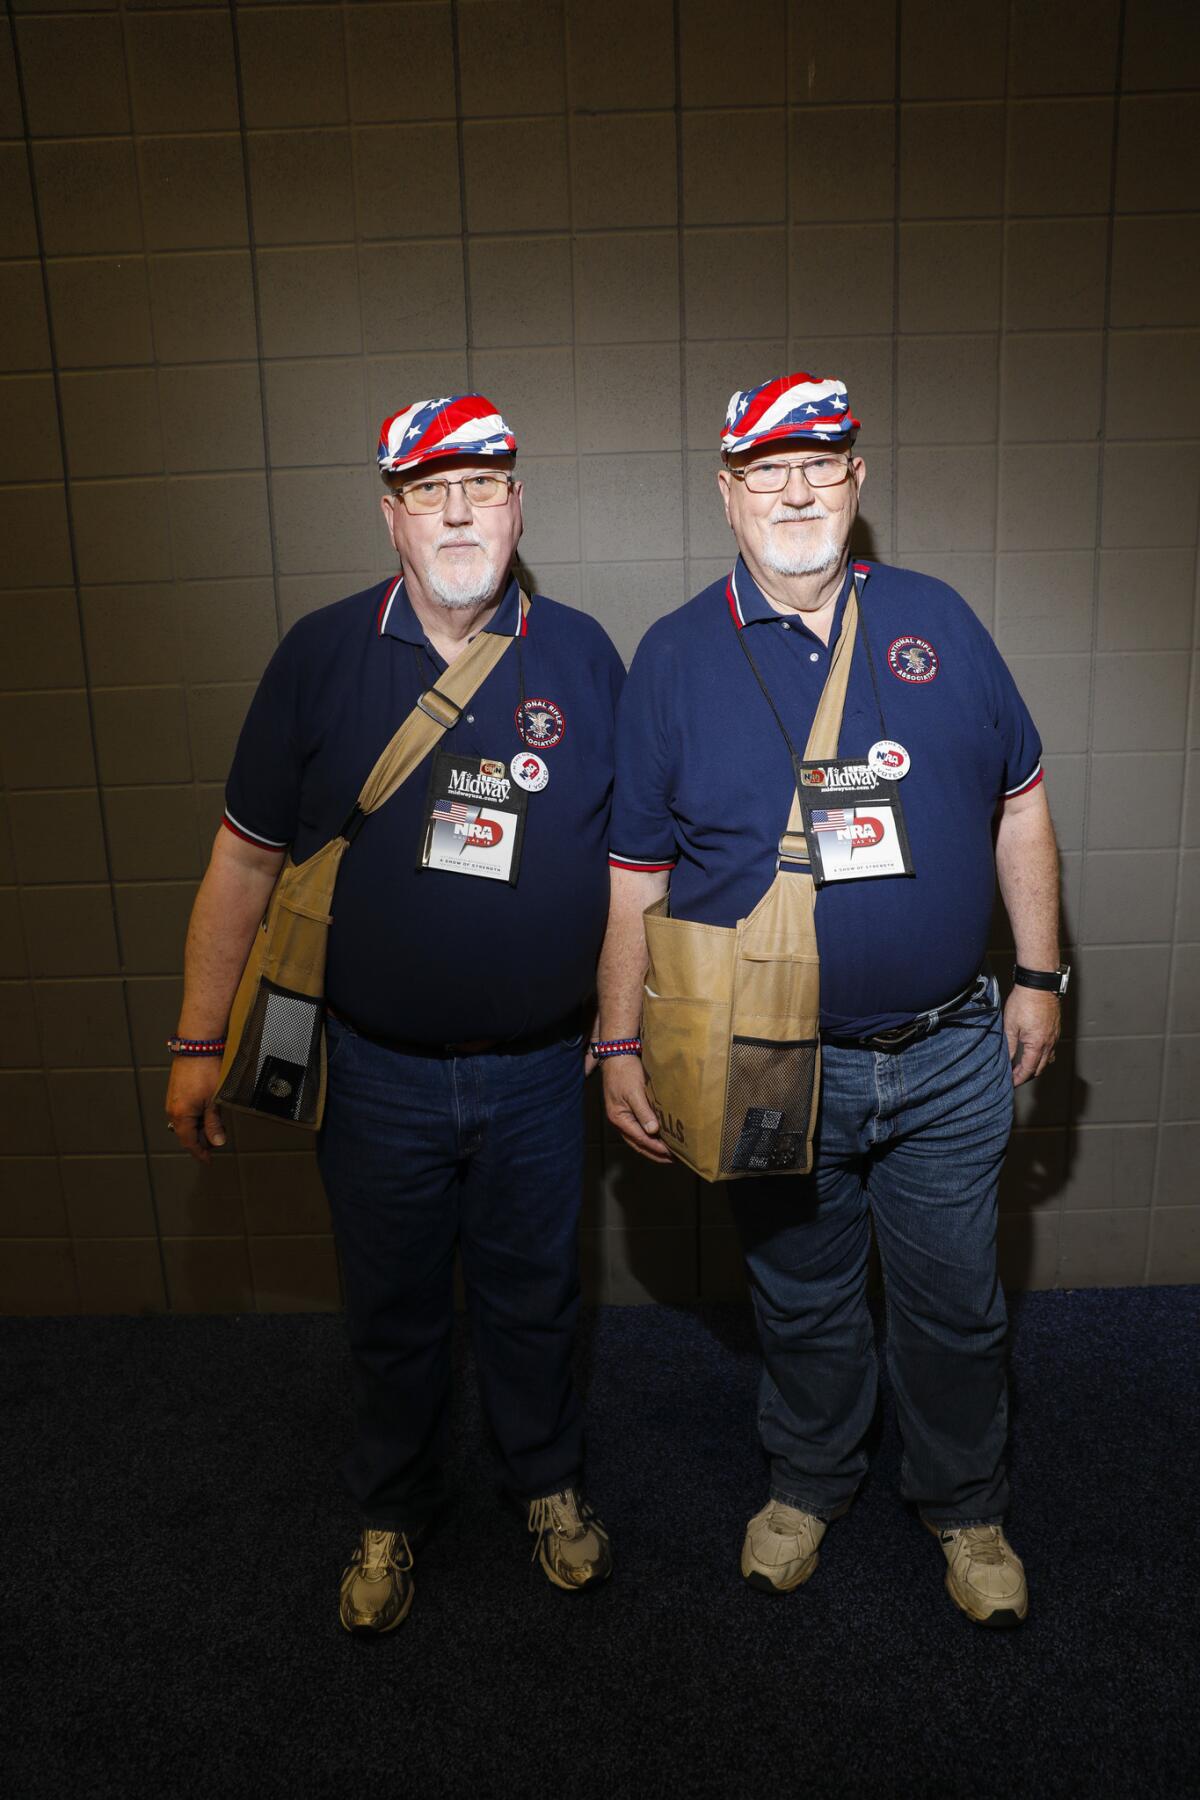 Twins Jerry Gooldin, left, of Columbus, Ohio, and John Gooldin of New Port Richey, Fla., both 67, have made an annual vacation of the NRA Annual Meetings & Exhibits.